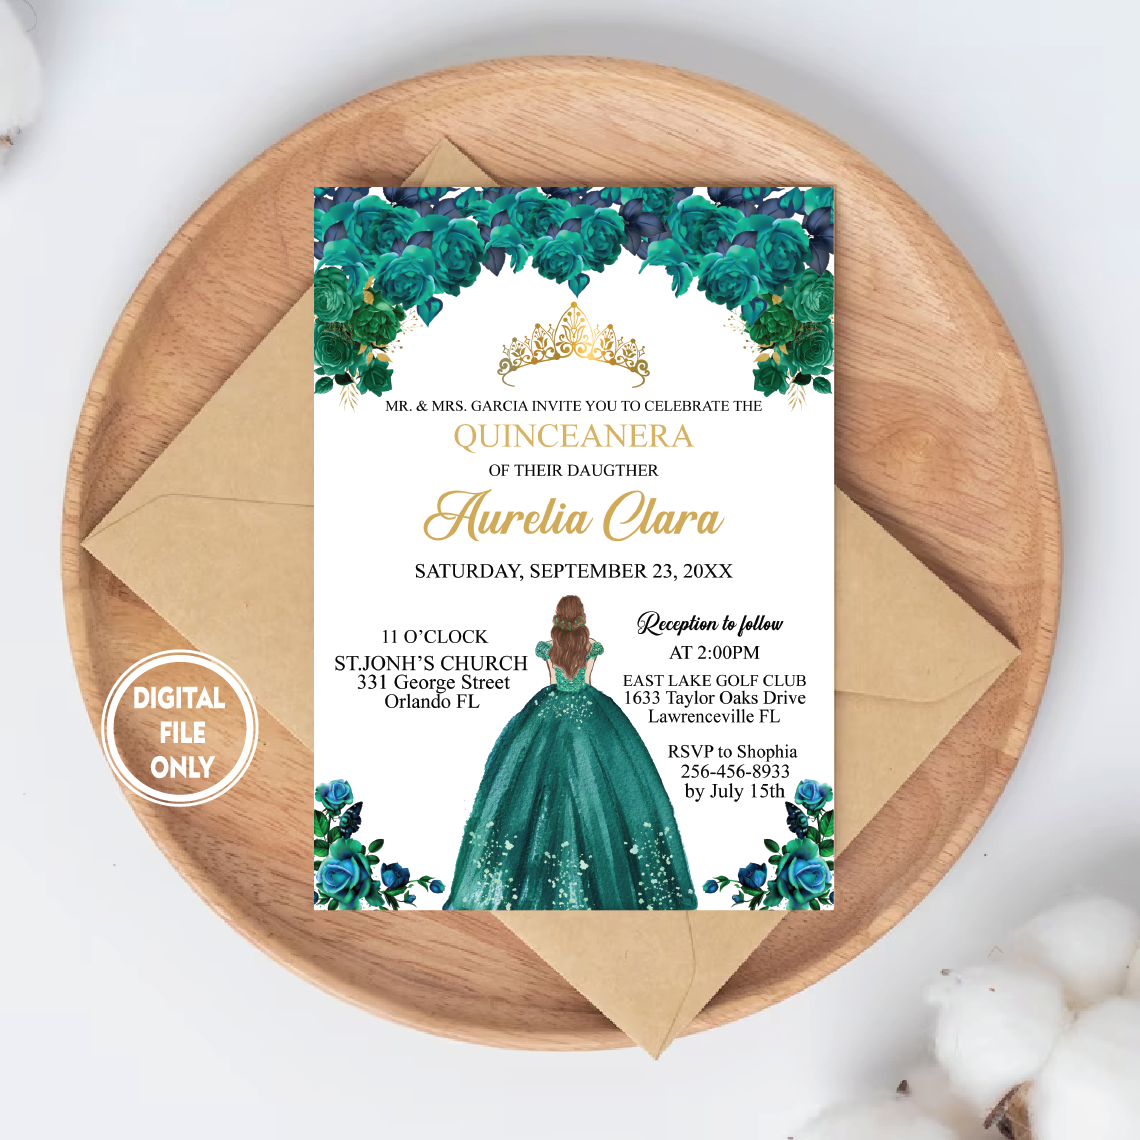 Personalized File Emerald Green Floral Quinceanera Invitation INSTANT DOWNLOAD, Mis Quince 15 Anos 16th Birthday Invite Diy Printable PNG File Only